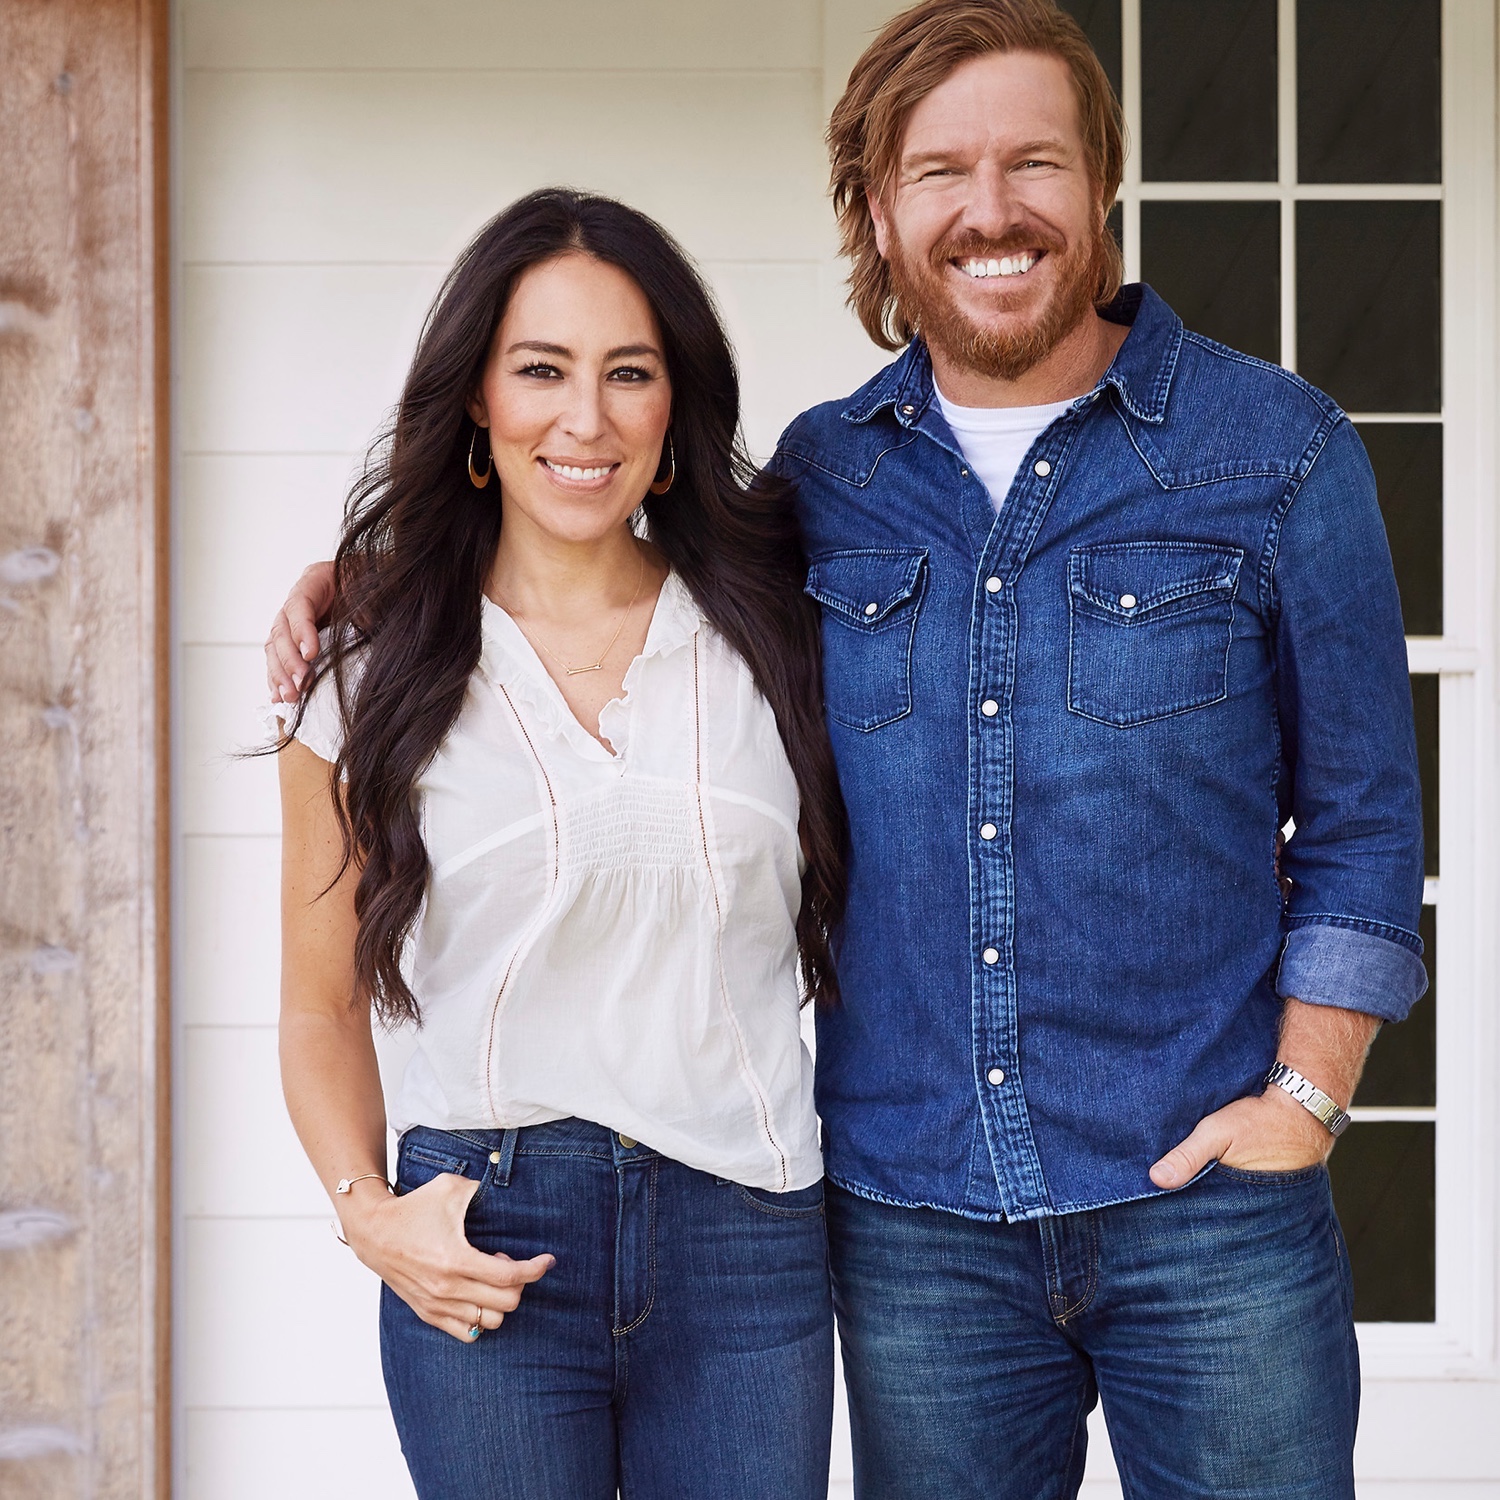 Shop Hearth and Hand: The Joanna Gaines Line at Target Launches! - THE ...